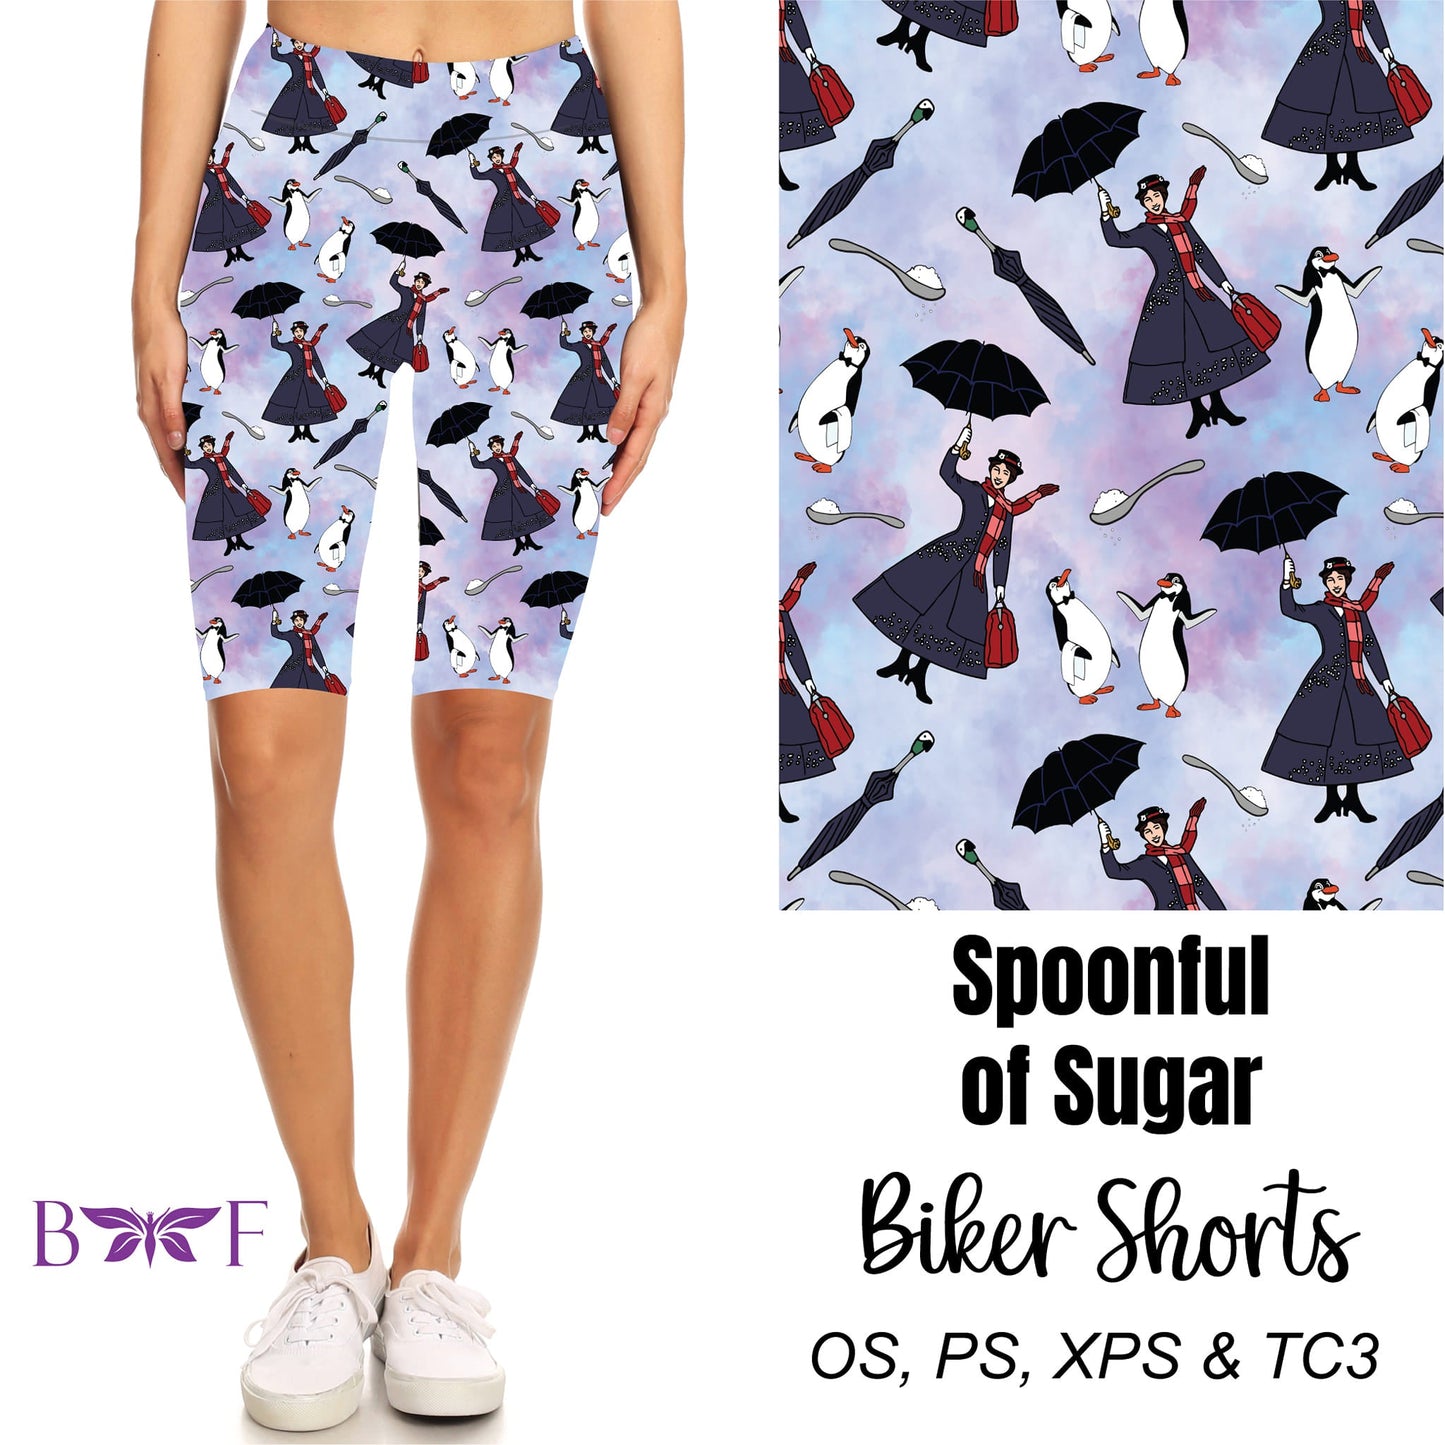 Spoon full of sugar capris with pockets